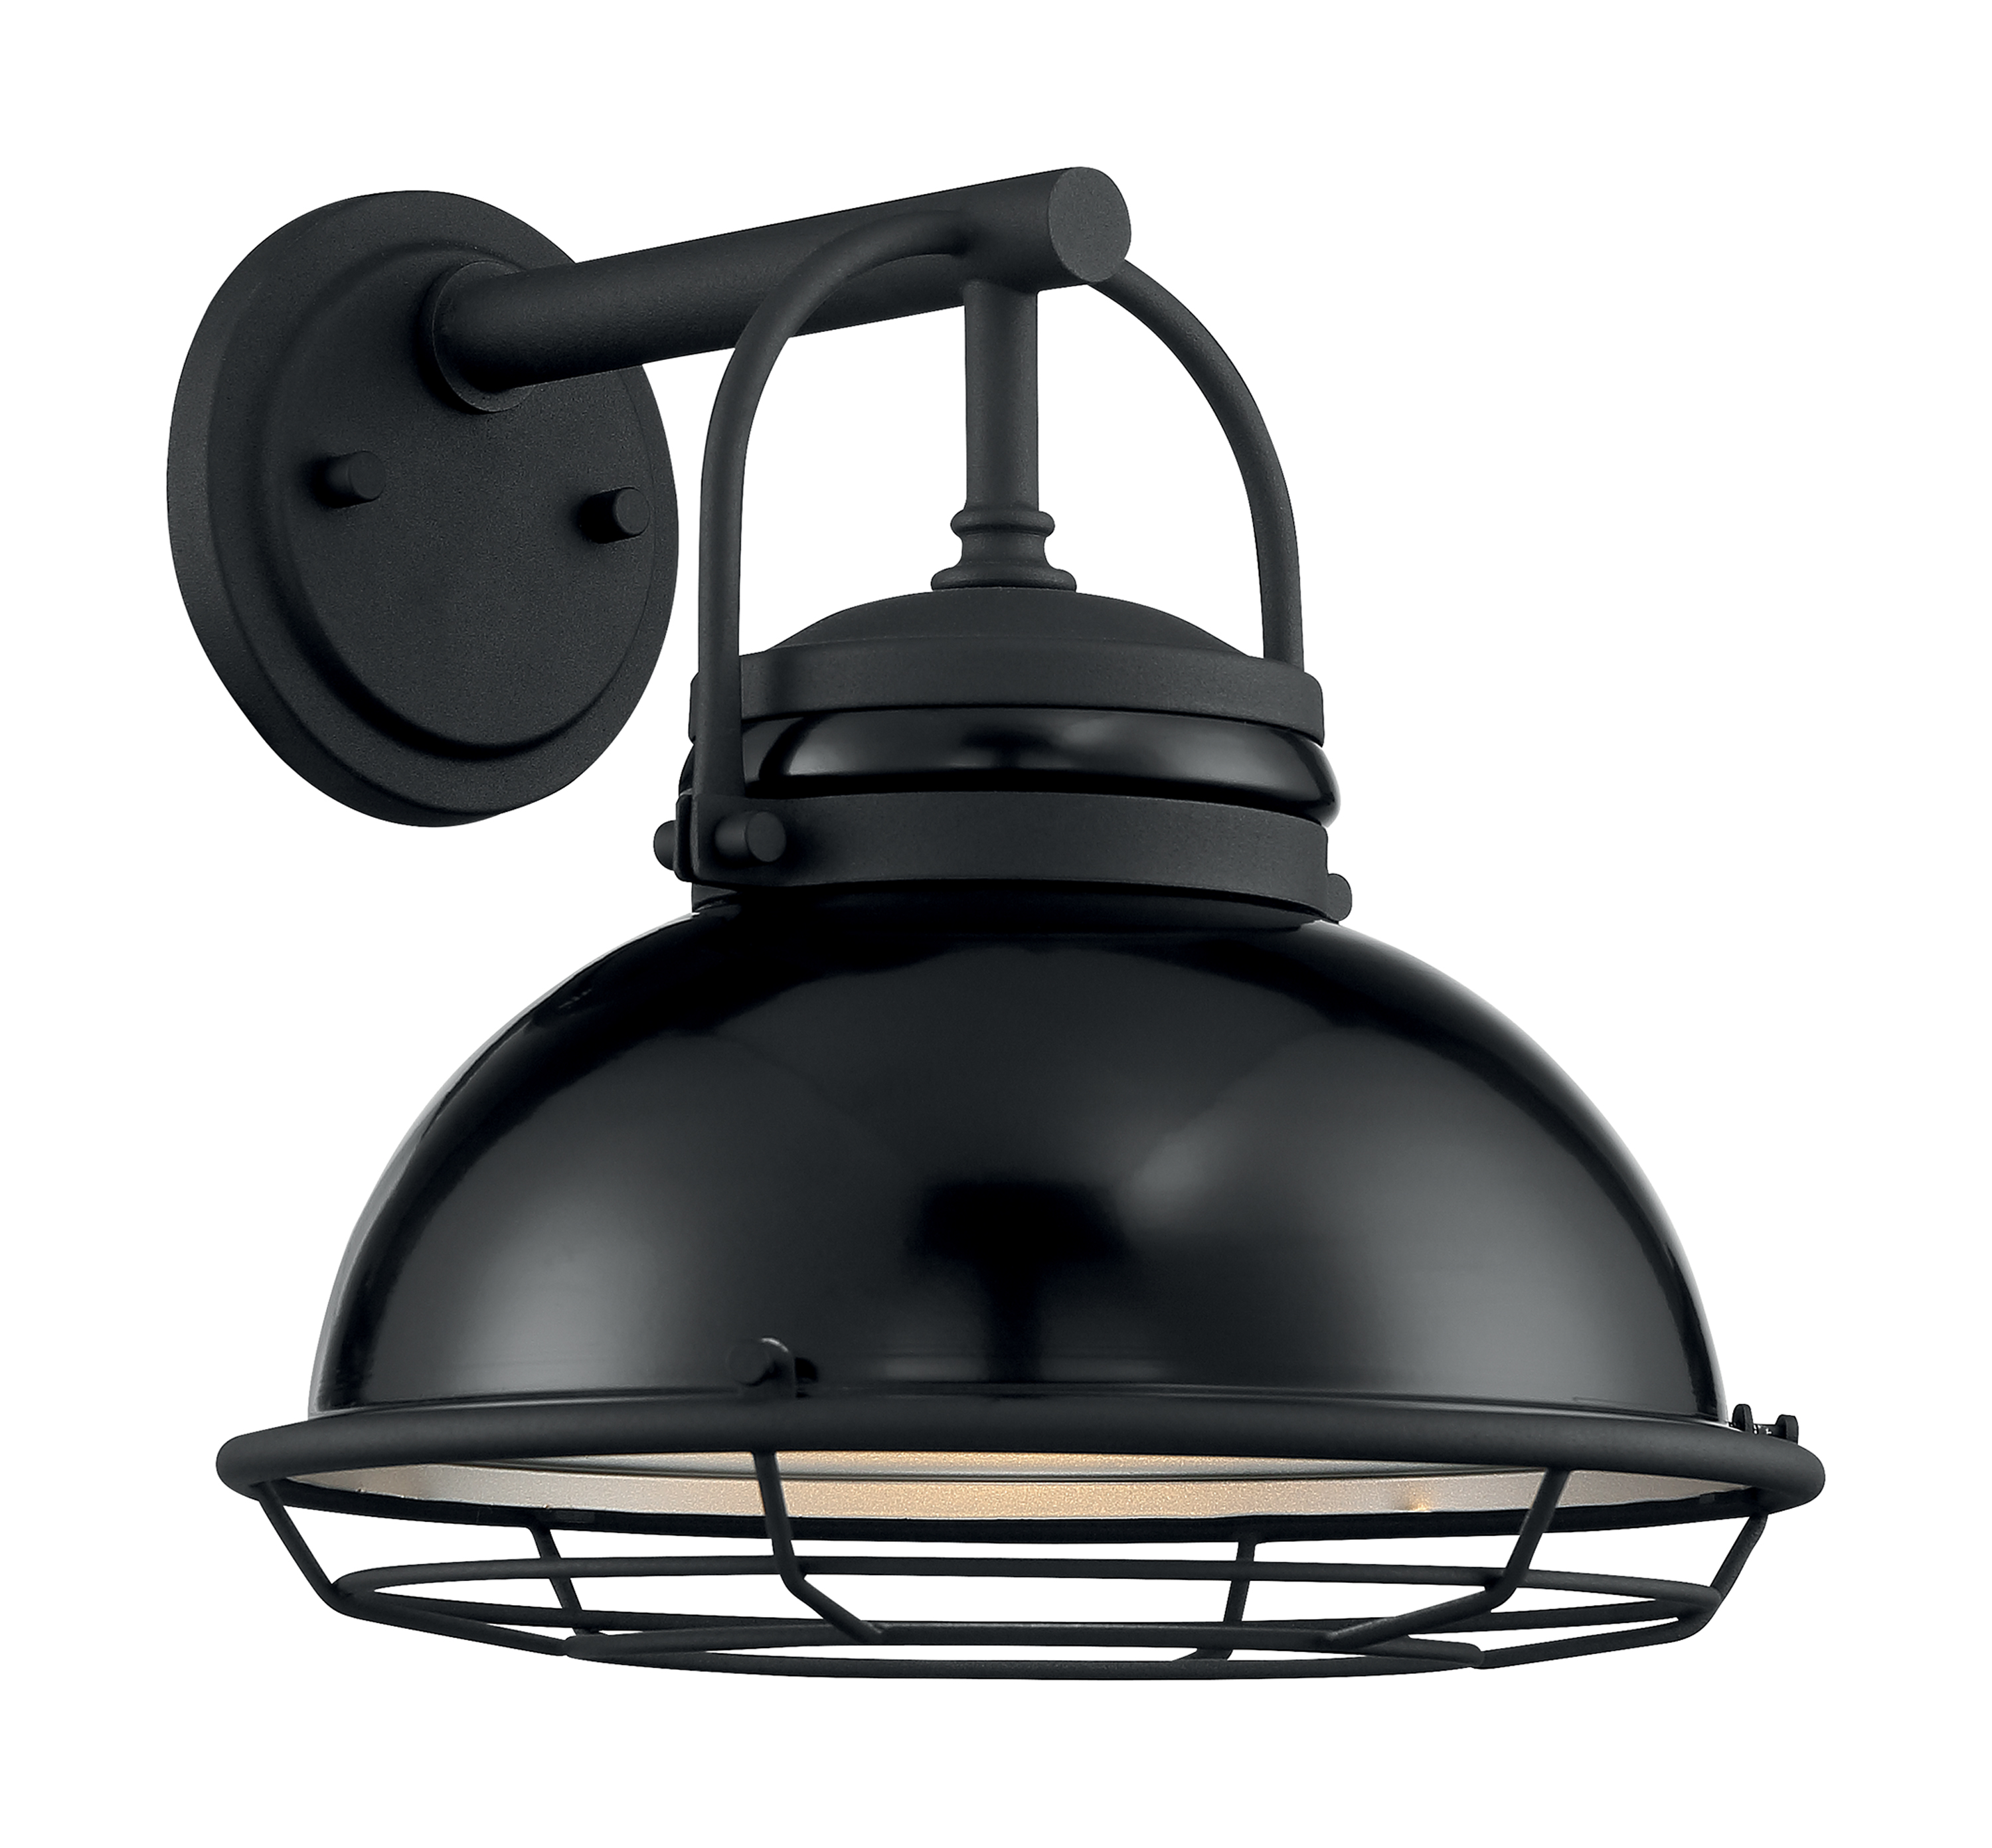 Upton 1-Light Large Outdoor Wall Sconce Fixture - Gloss Black Finish with Silver and Textured Black Accents